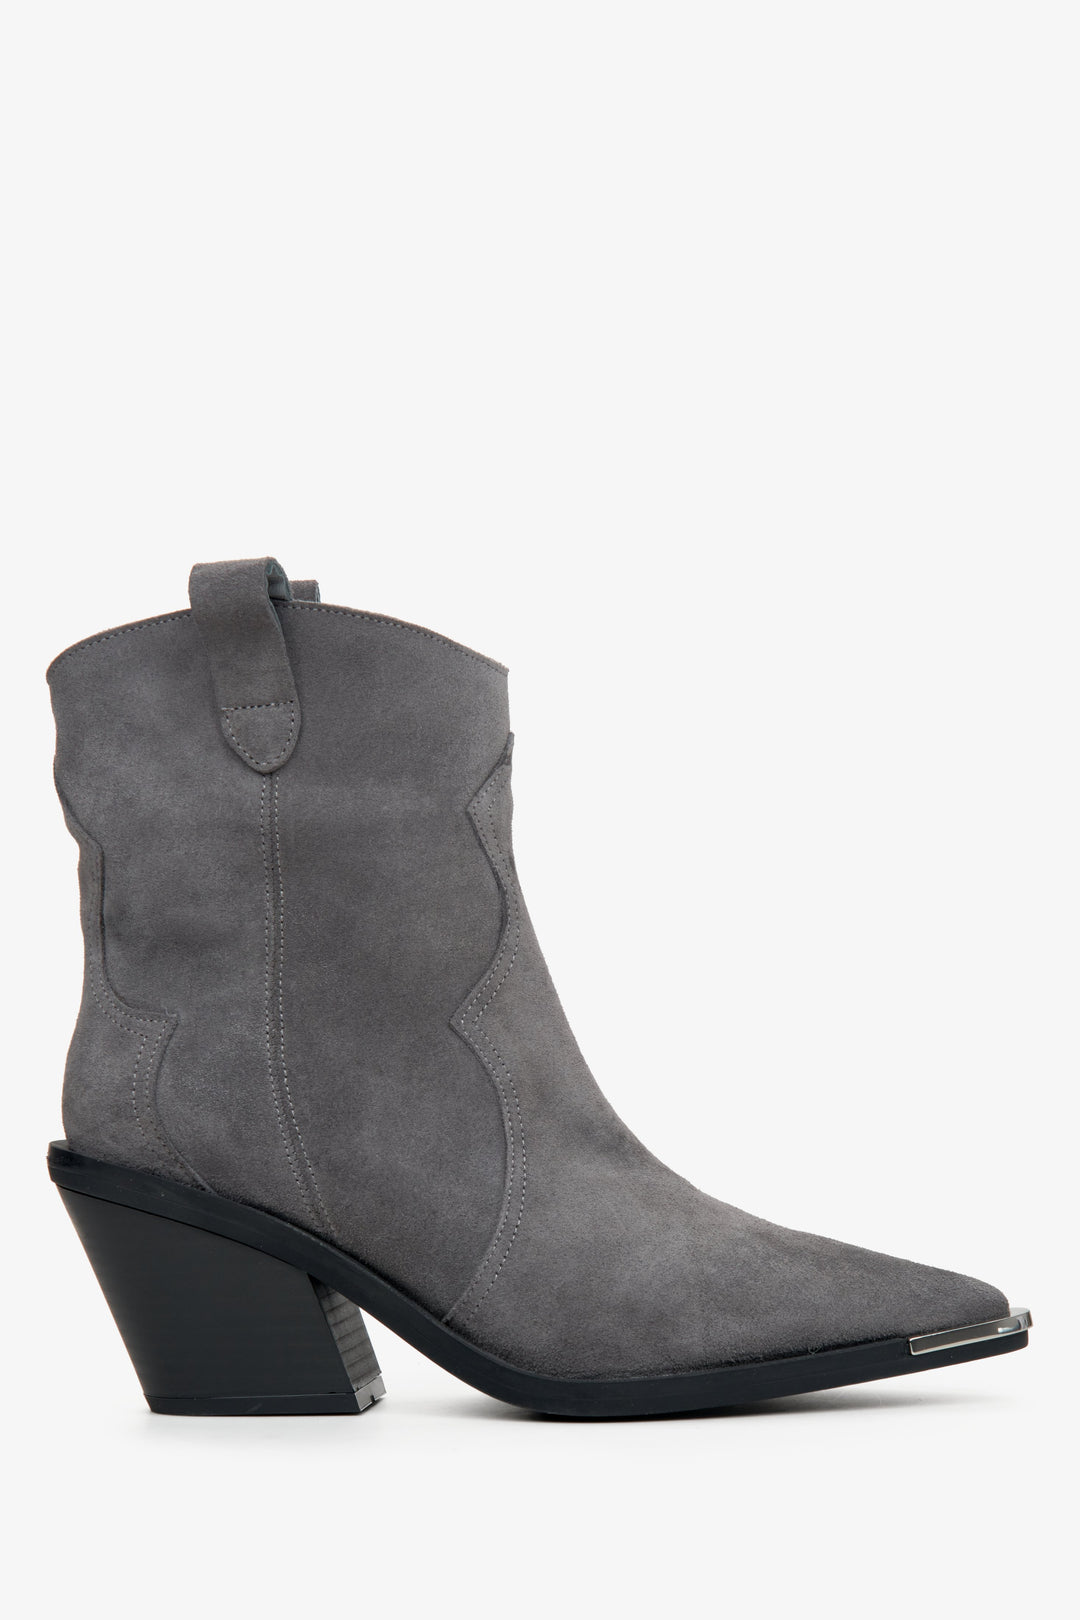 Women's Grey Suede Cowoy Boots with Silver Accents Estro ER00114049